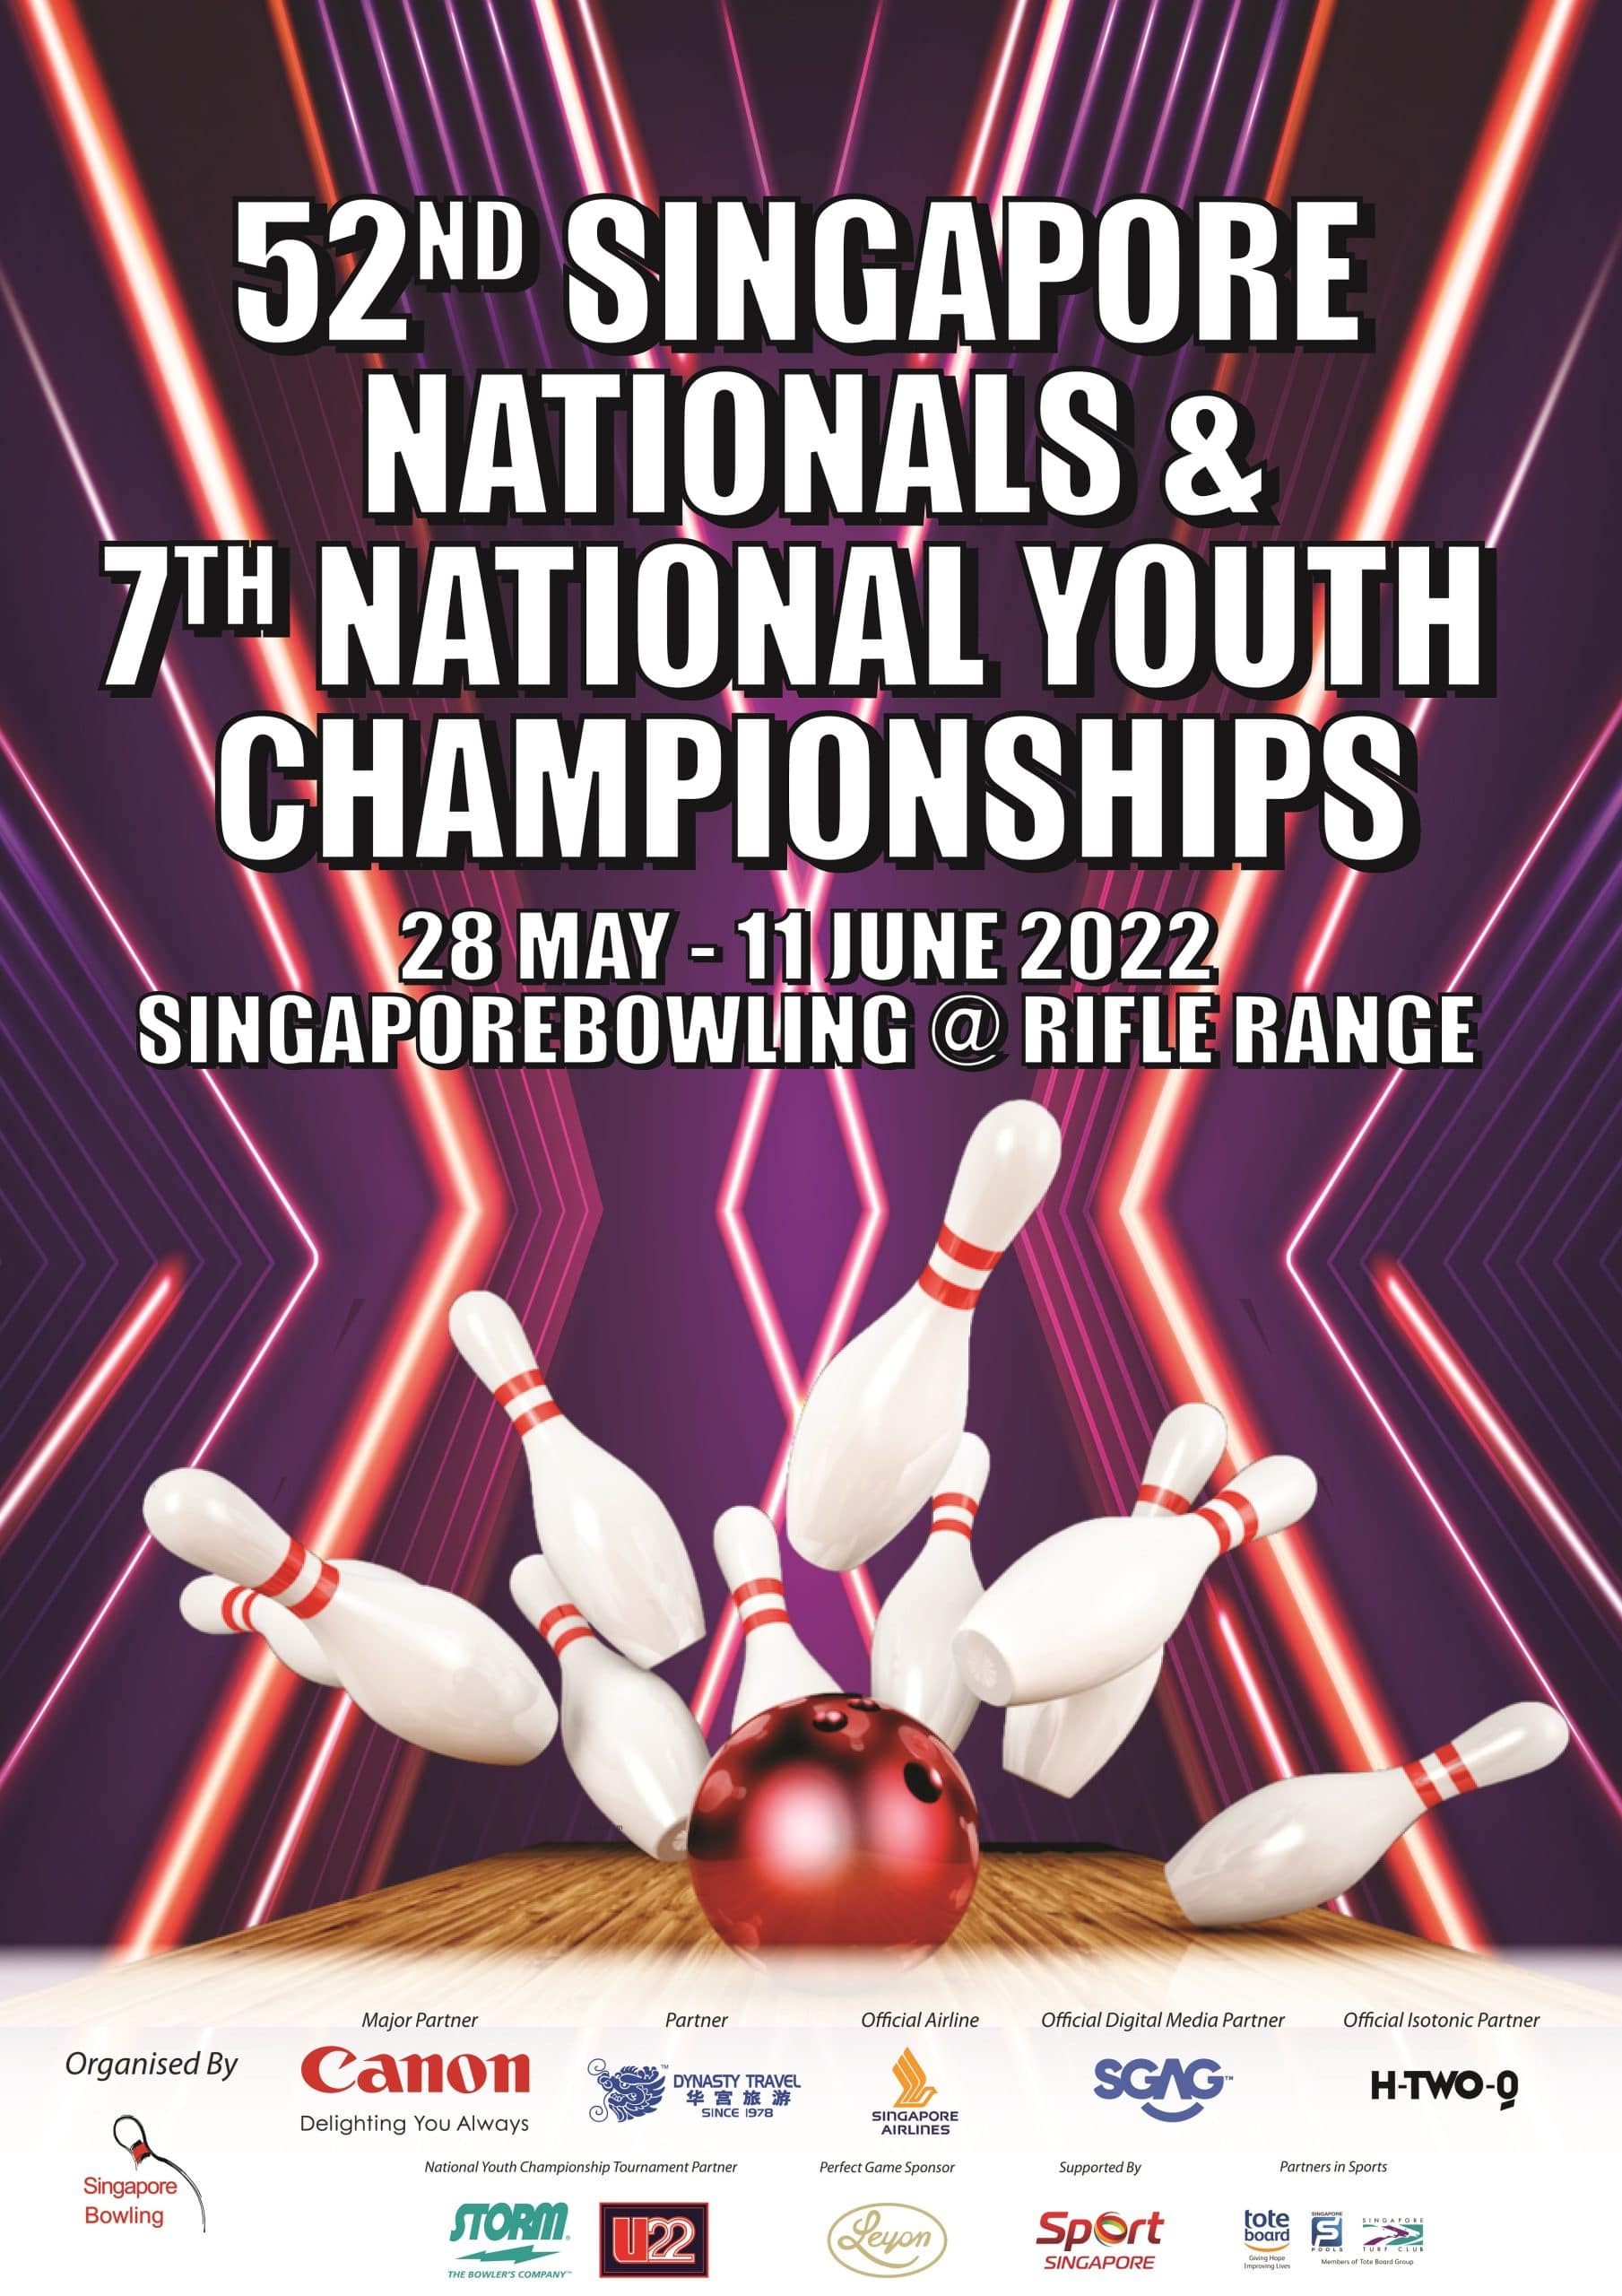 52nd Singapore Nationals & 7th National Youth Championships 2022